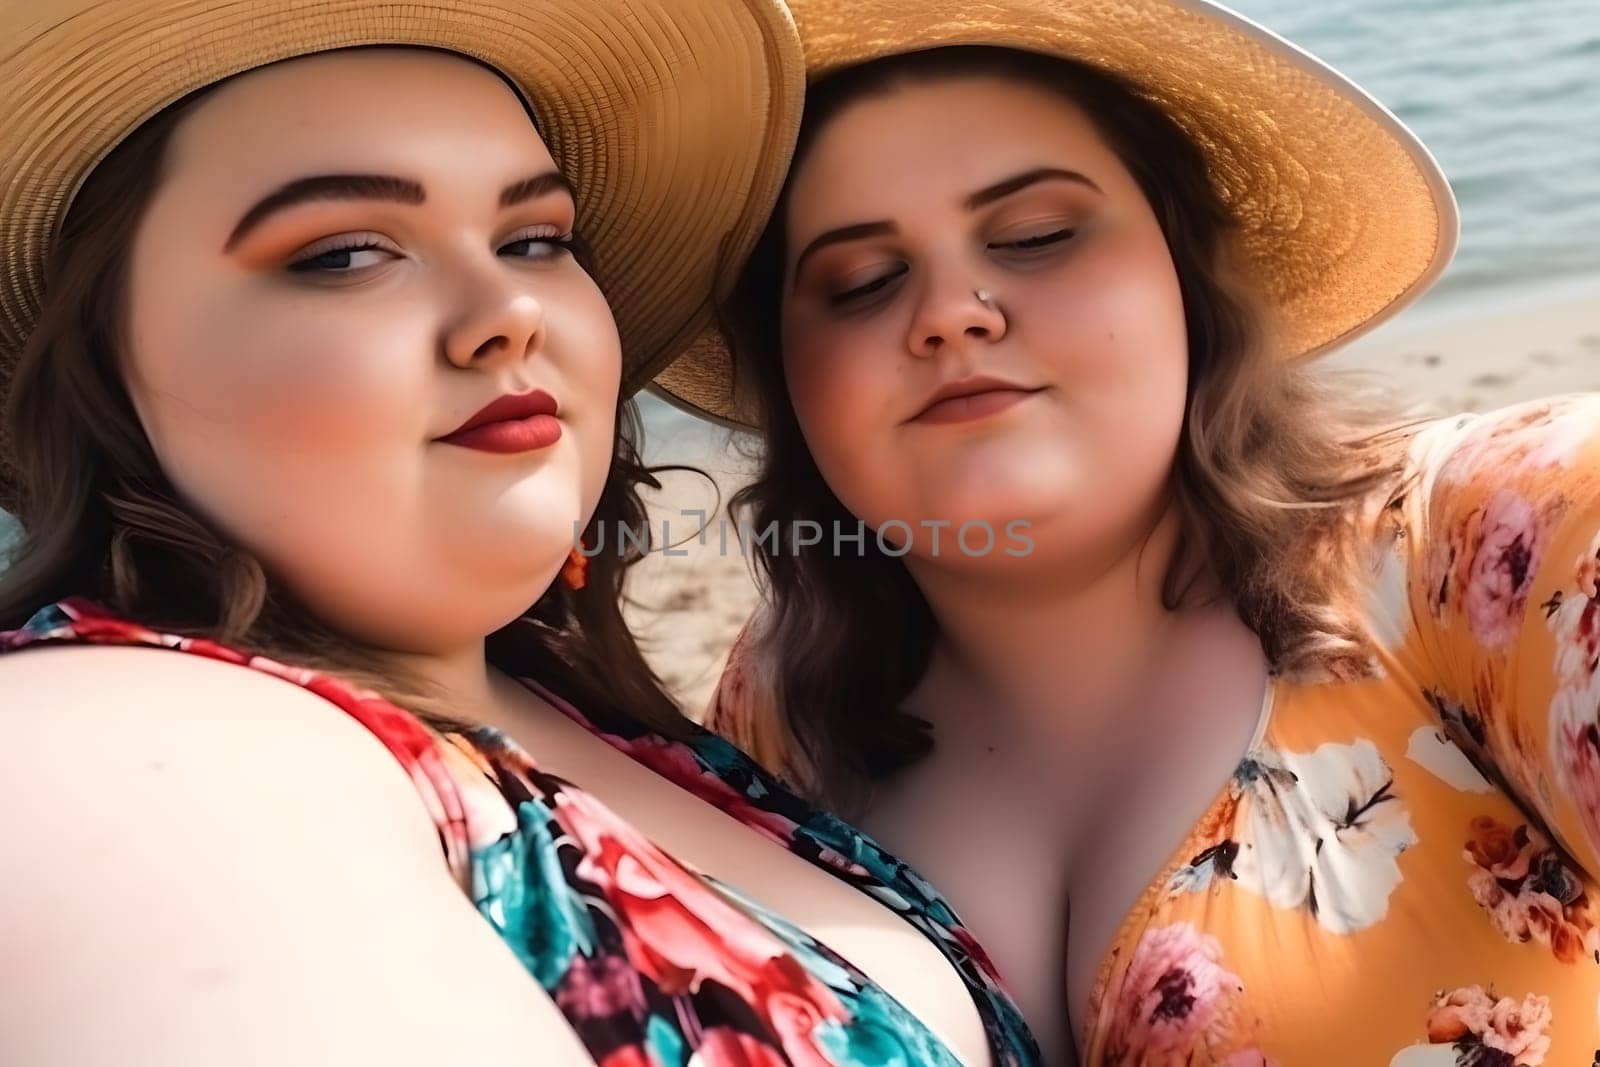 Two fat caucasian girls spending good time at the beach together. Neural network generated in May 2023. Not based on any actual person, scene or pattern.